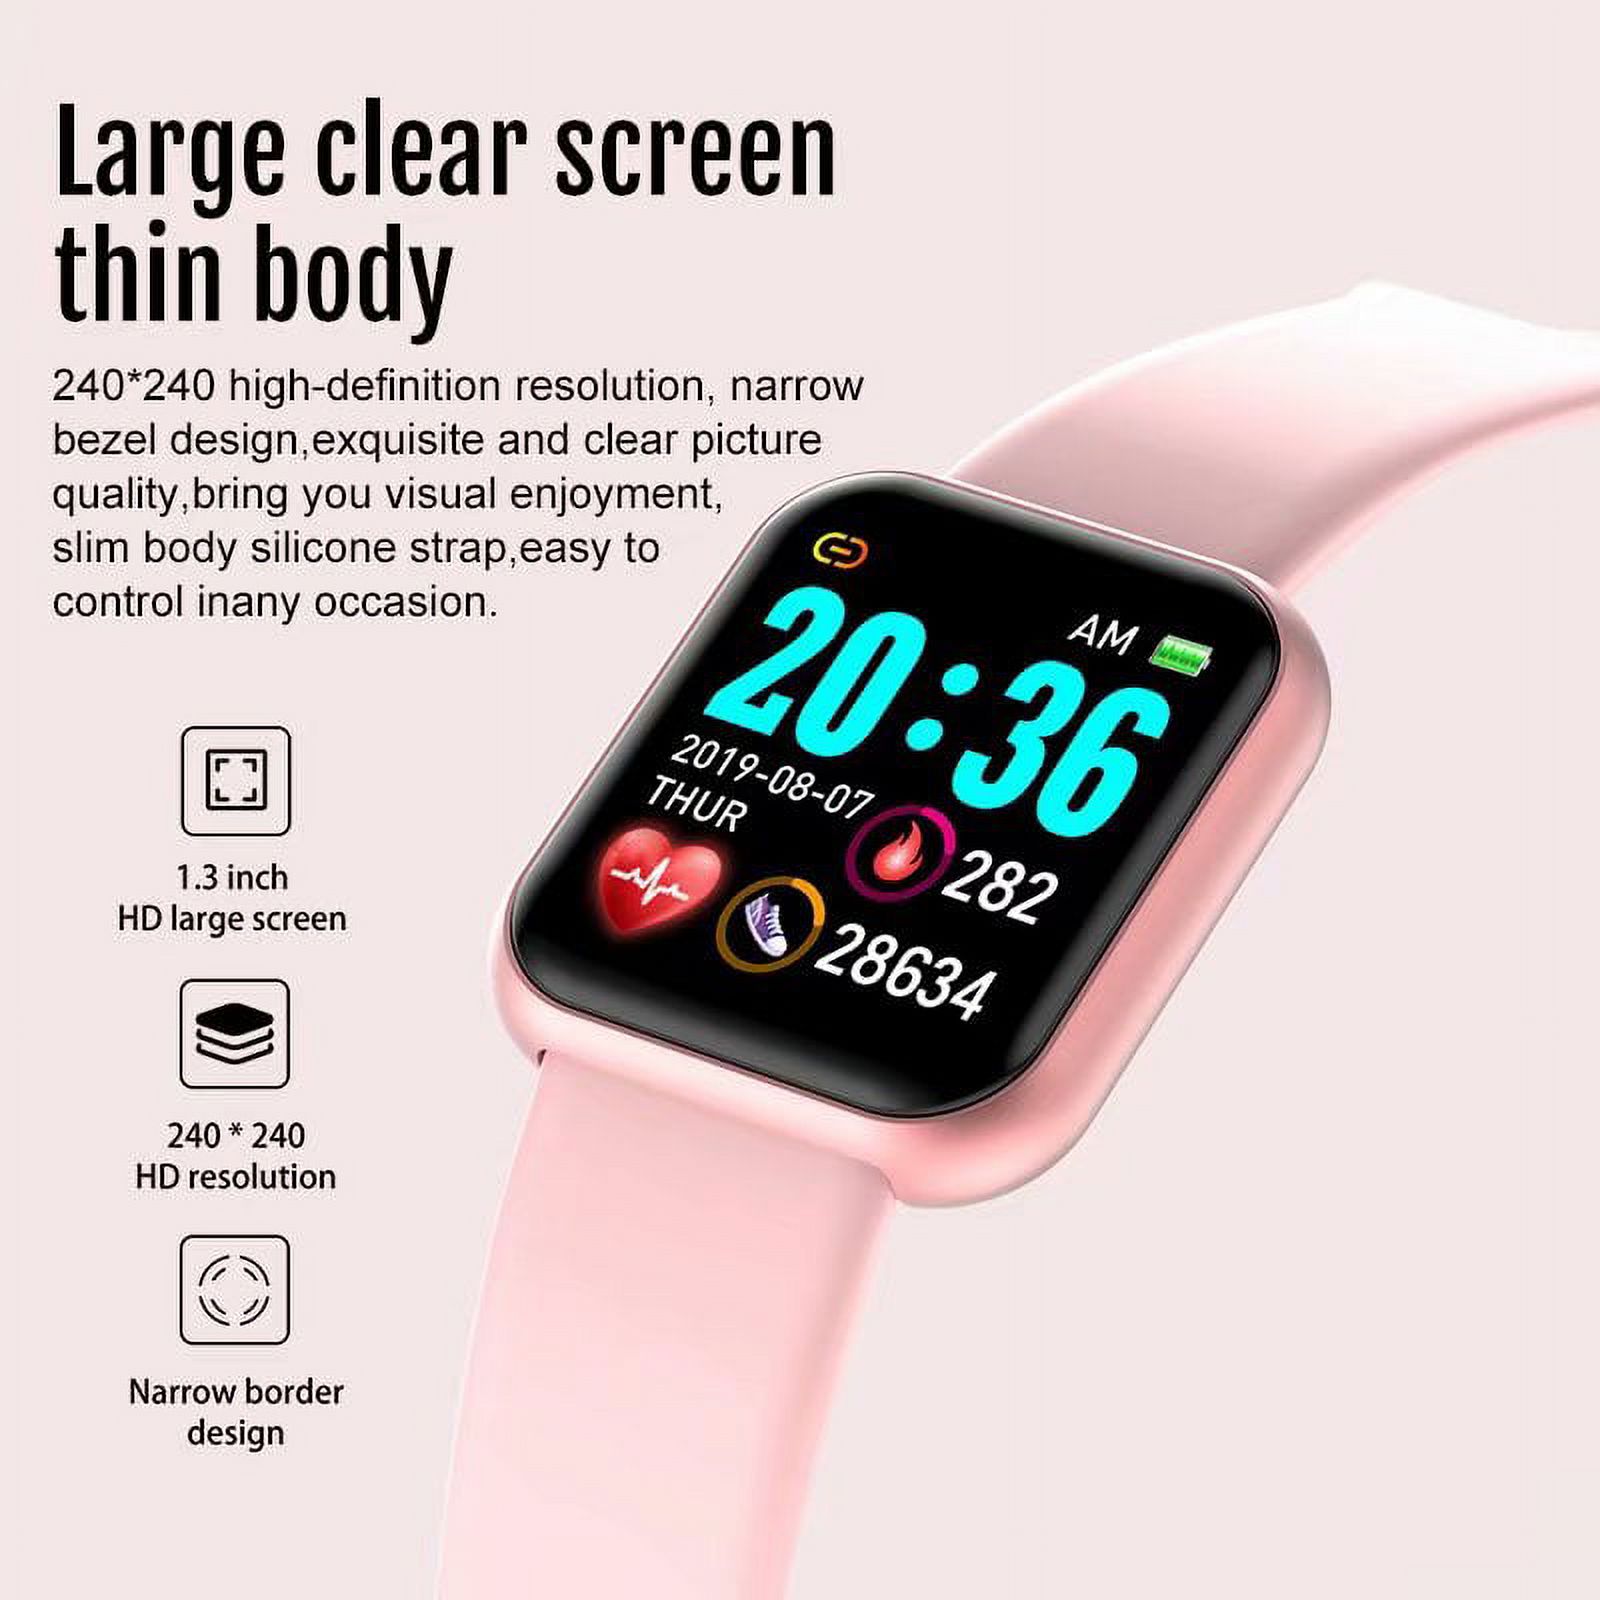 1.3" Smart Bluetooth Watch IP67 Waterproof Tracker Fitness Bracelet Colorful Screen Blood Pressure Monitor Wristband All Black - image 4 of 10